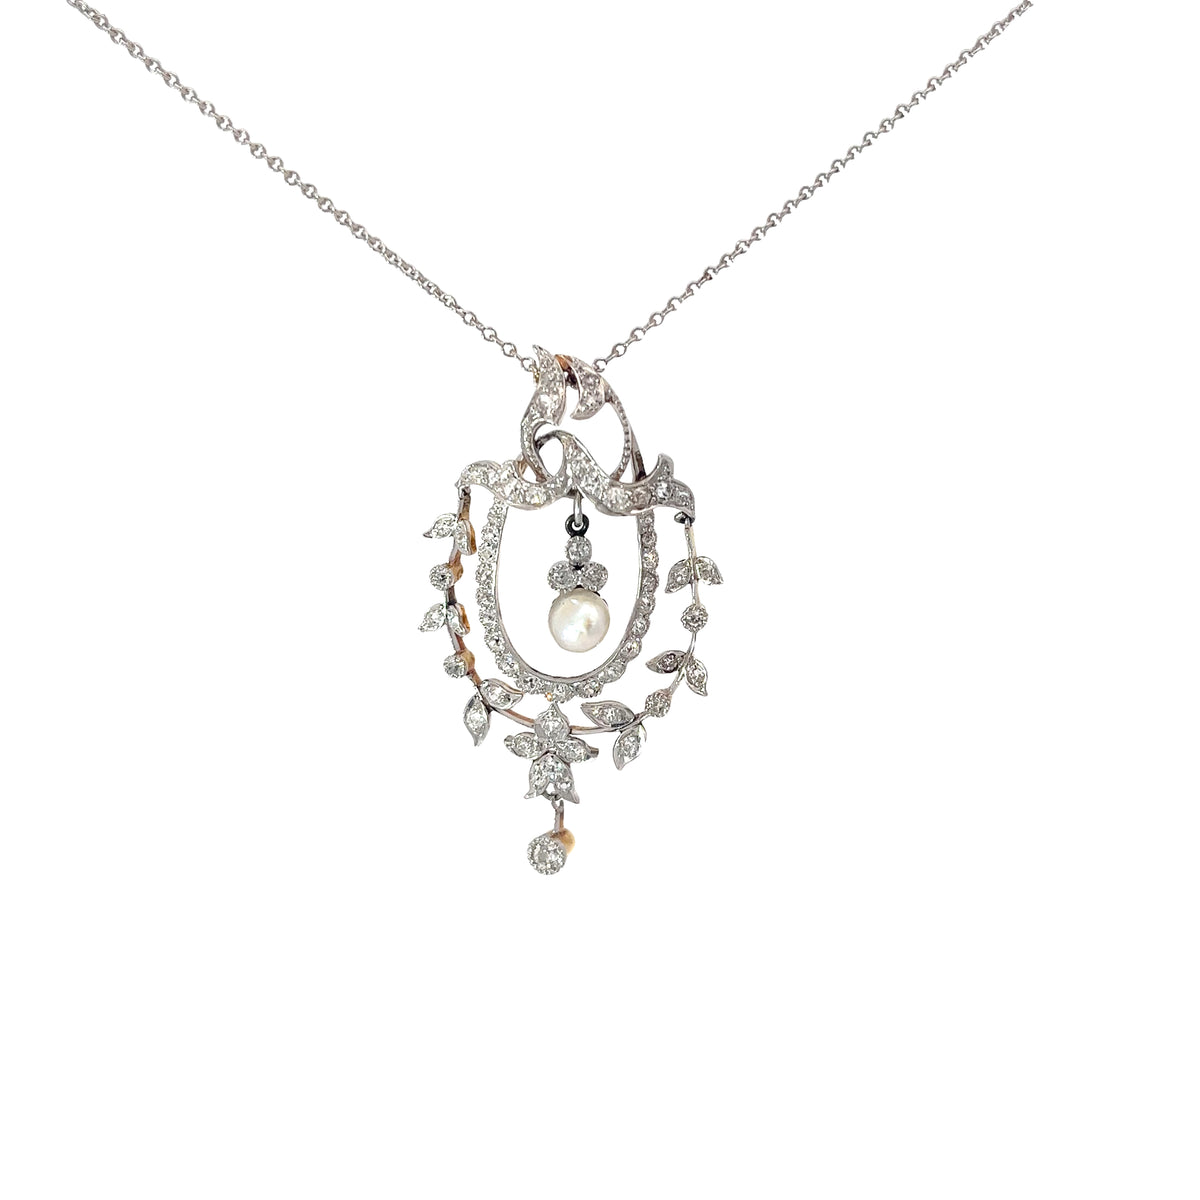 Ladies 18k white gold Vintage Diamond and Pearl Necklace